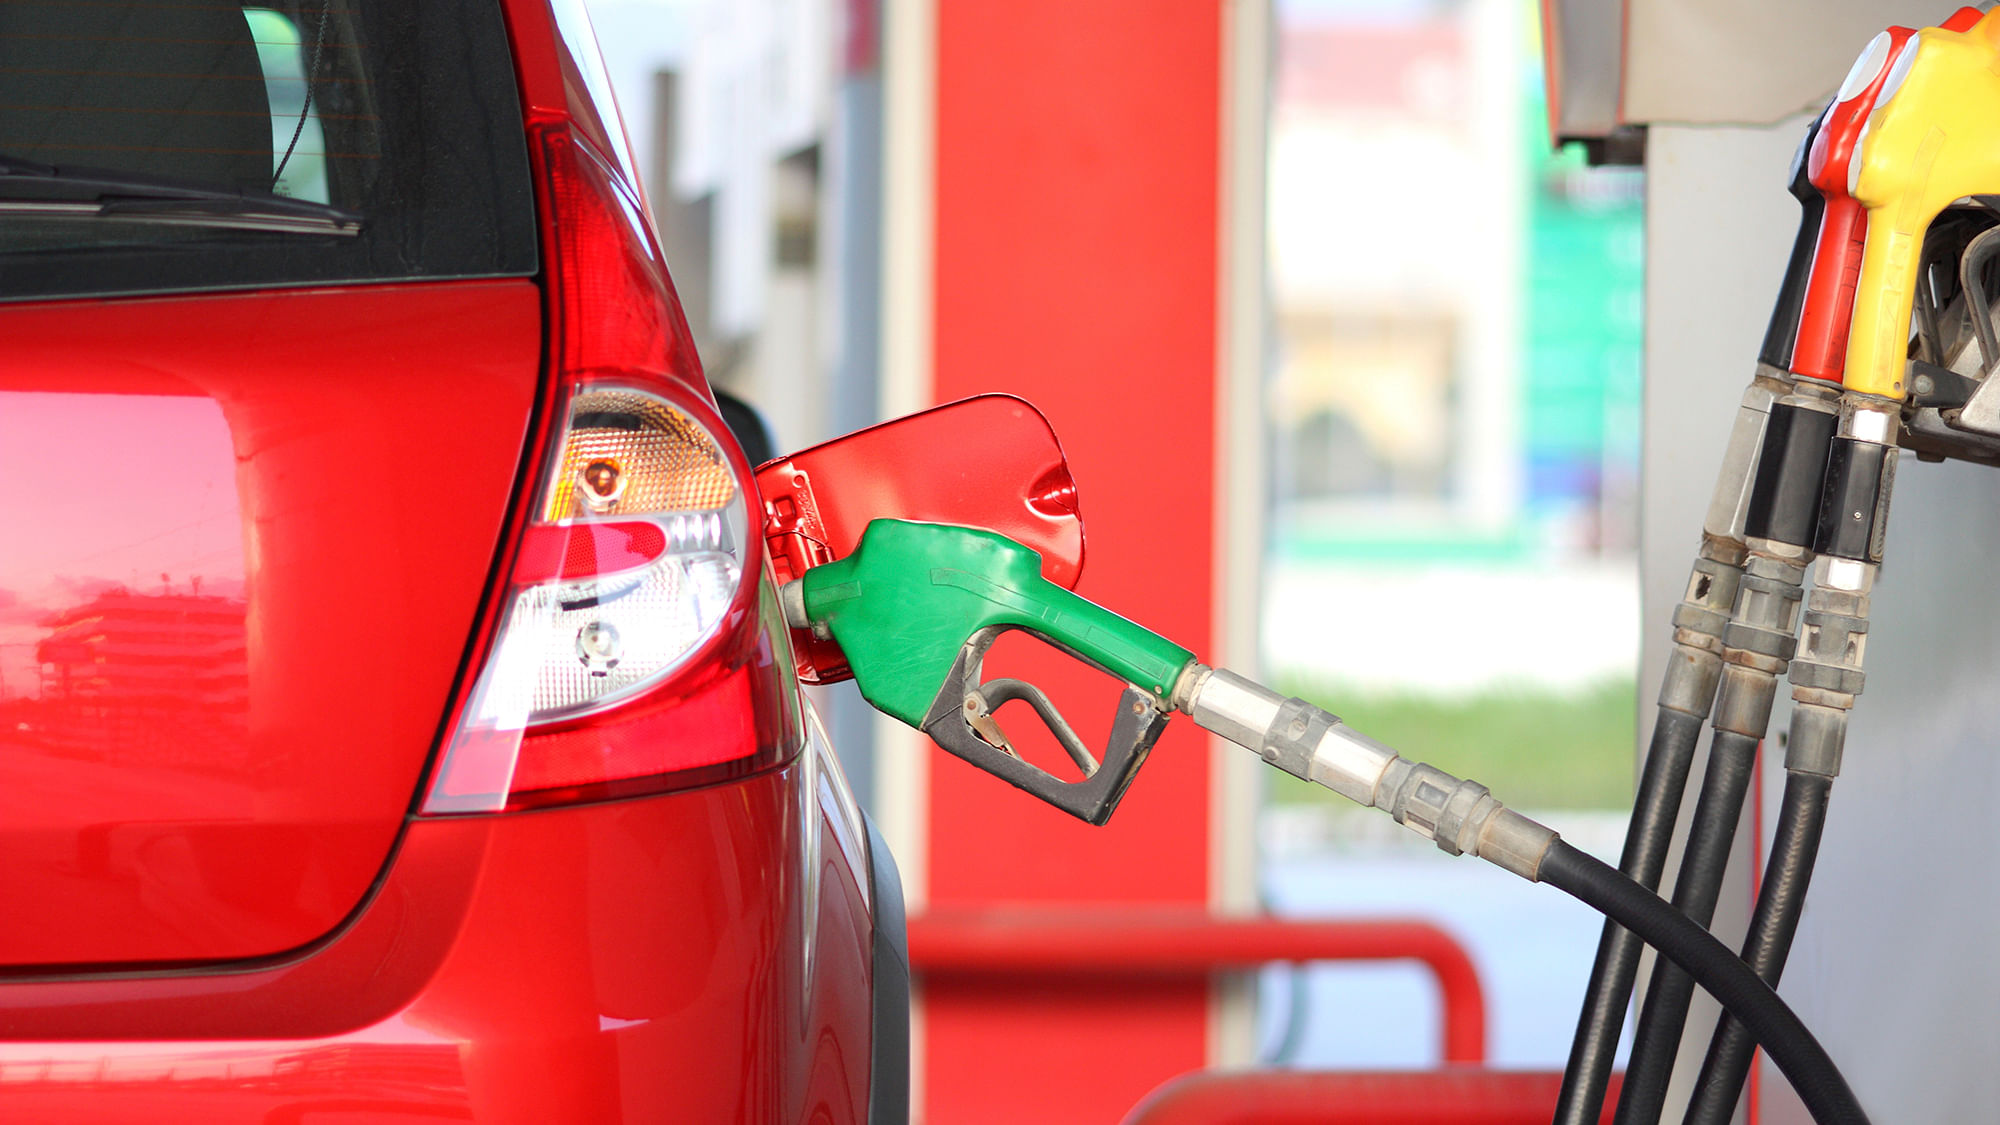 Petrol prices see biggest daily jump in 17 years - BBC News